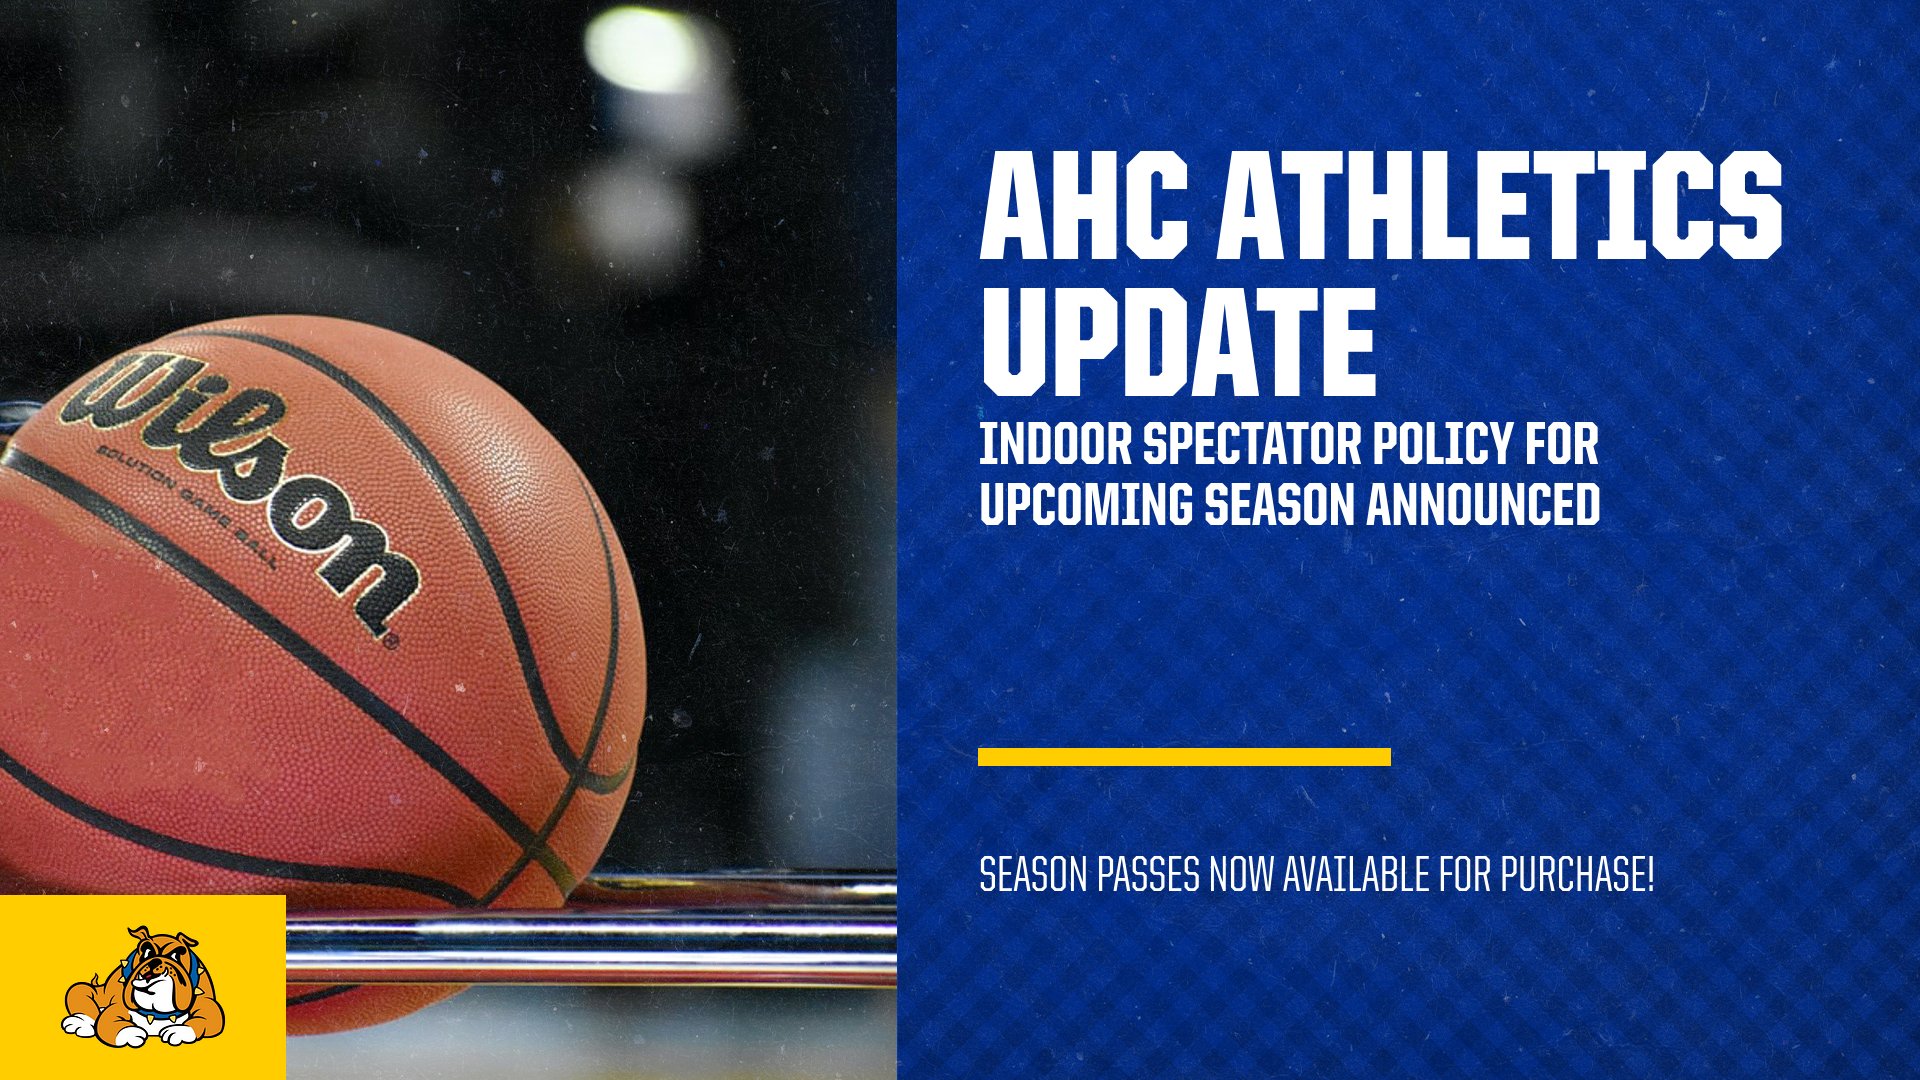 AHC Athletics Announces Spectator Policy for Indoor Sports